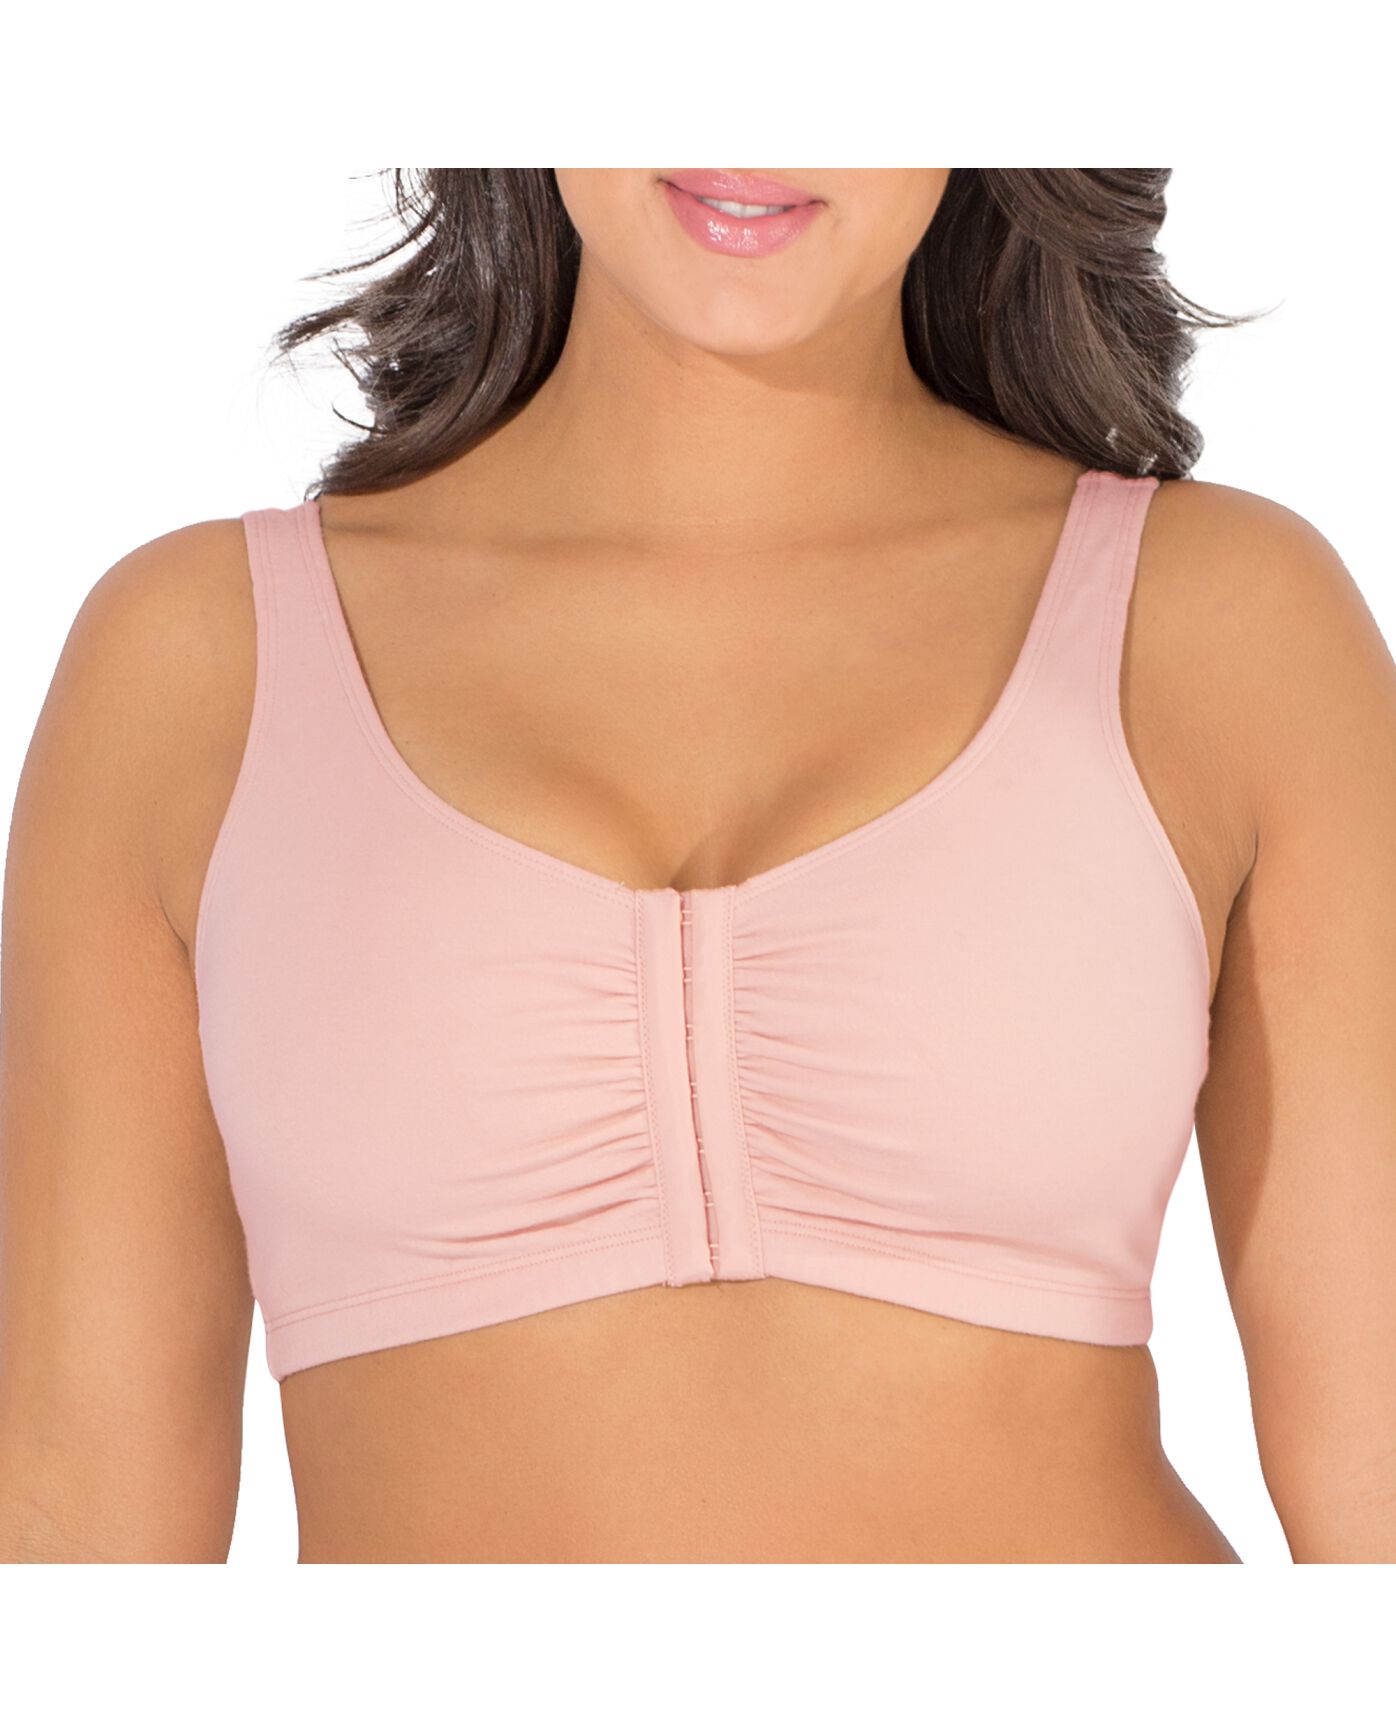 Fruit of the Loom Women's Seamed Soft Cup Wirefree Cotton Bra only